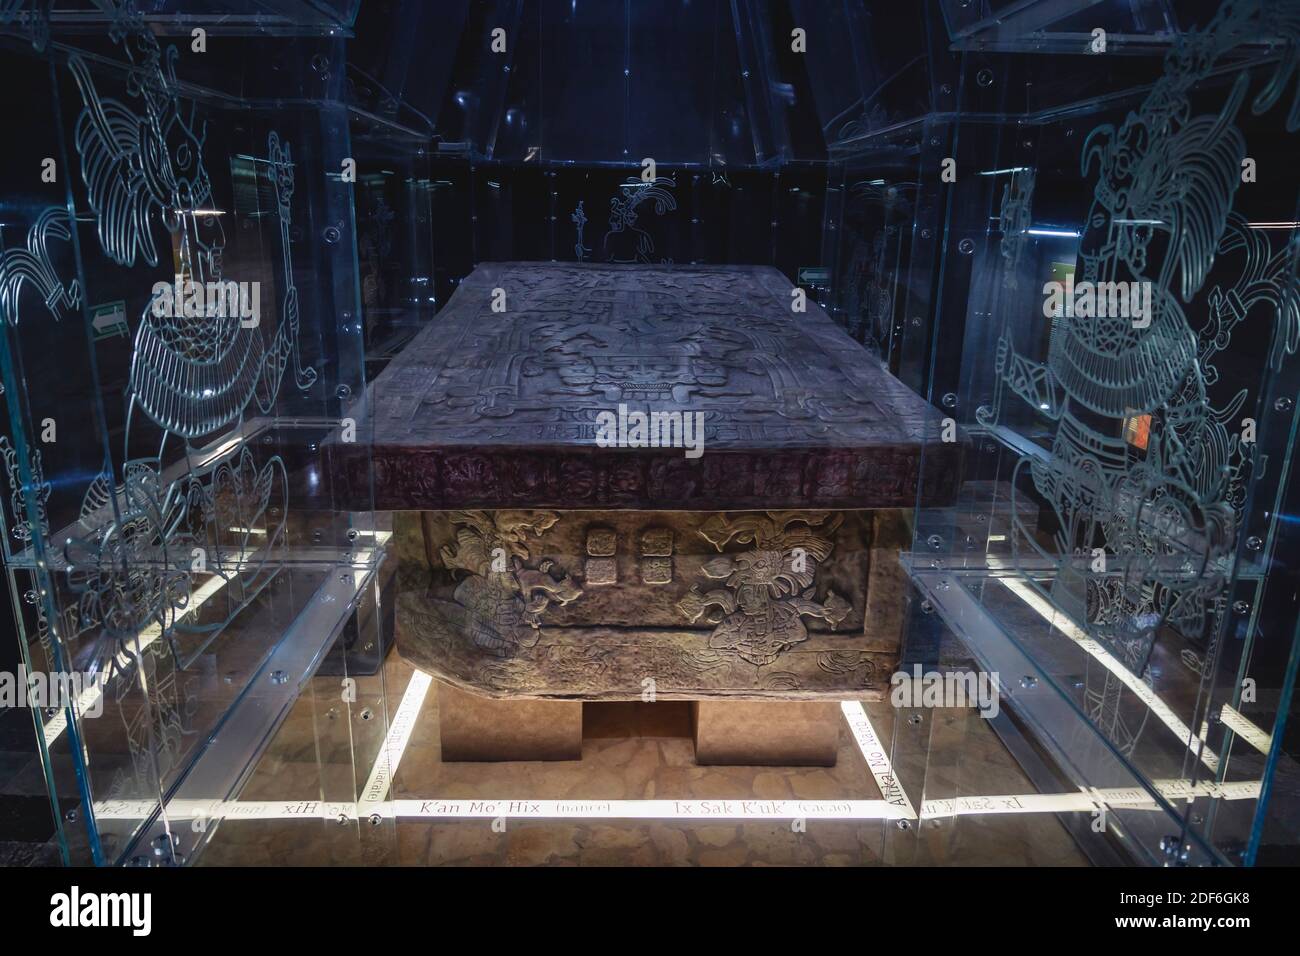 Palenque, Chiapas, Mexico - 22 May 2019: The tomb of Mayan king Pacal in the museum exhibition of the archaeological site of Palenque Stock Photo